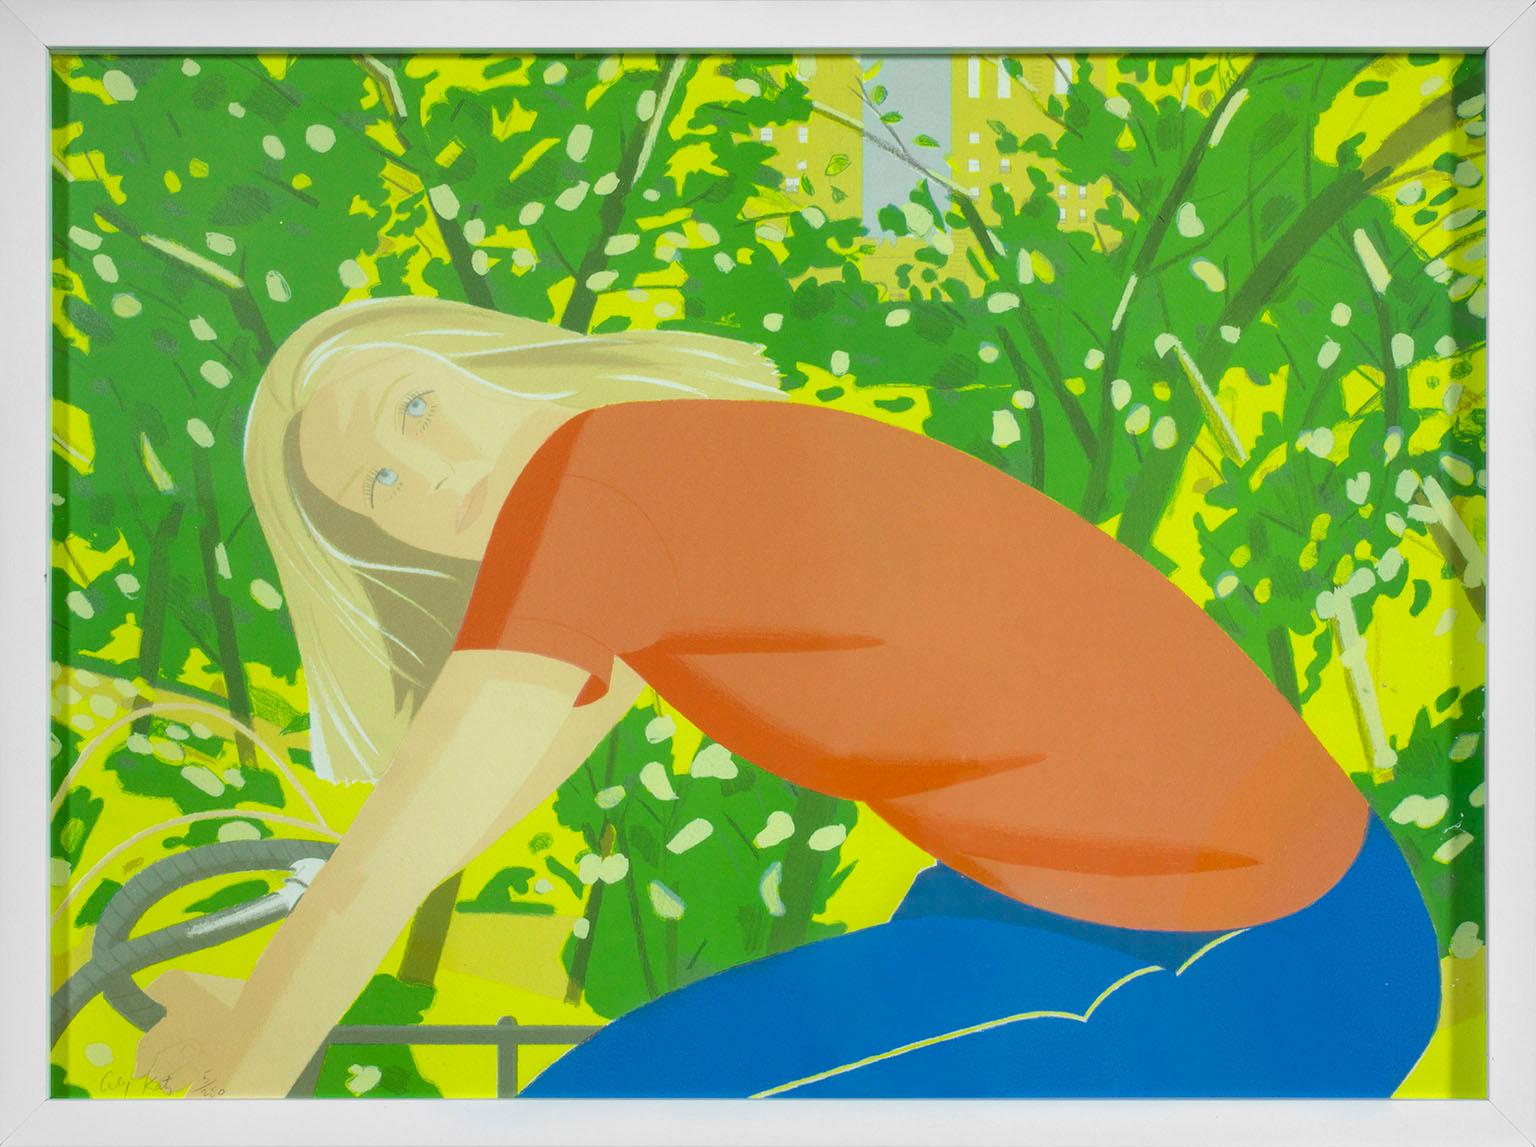 "Bicycle Rider" lithograph by Alex Katz from the "New York, New York" portfolio